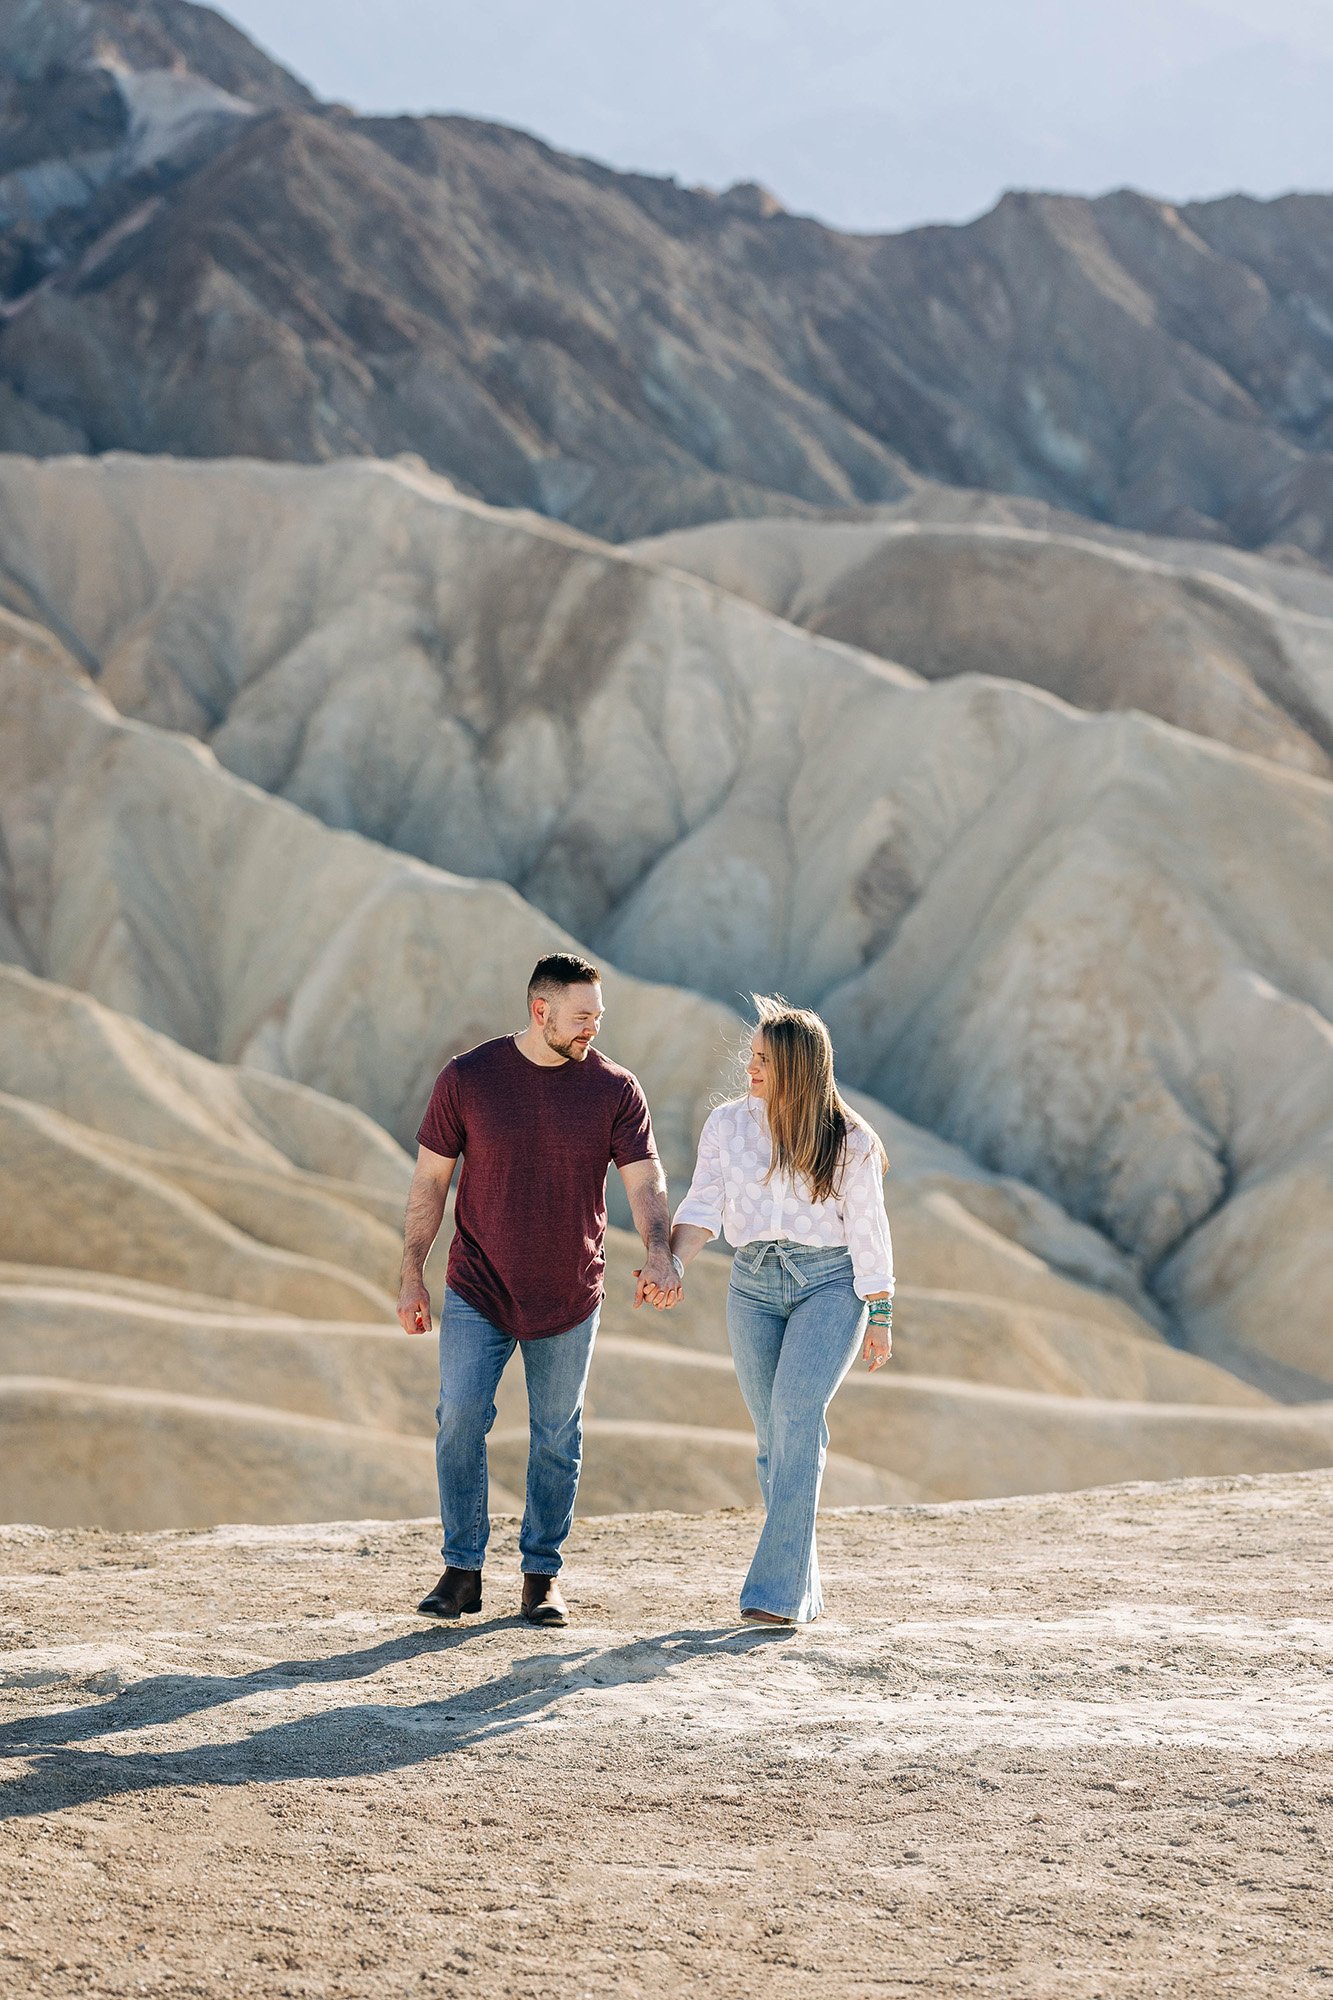 Aly and Alex take a walk in Death Valley National Park.